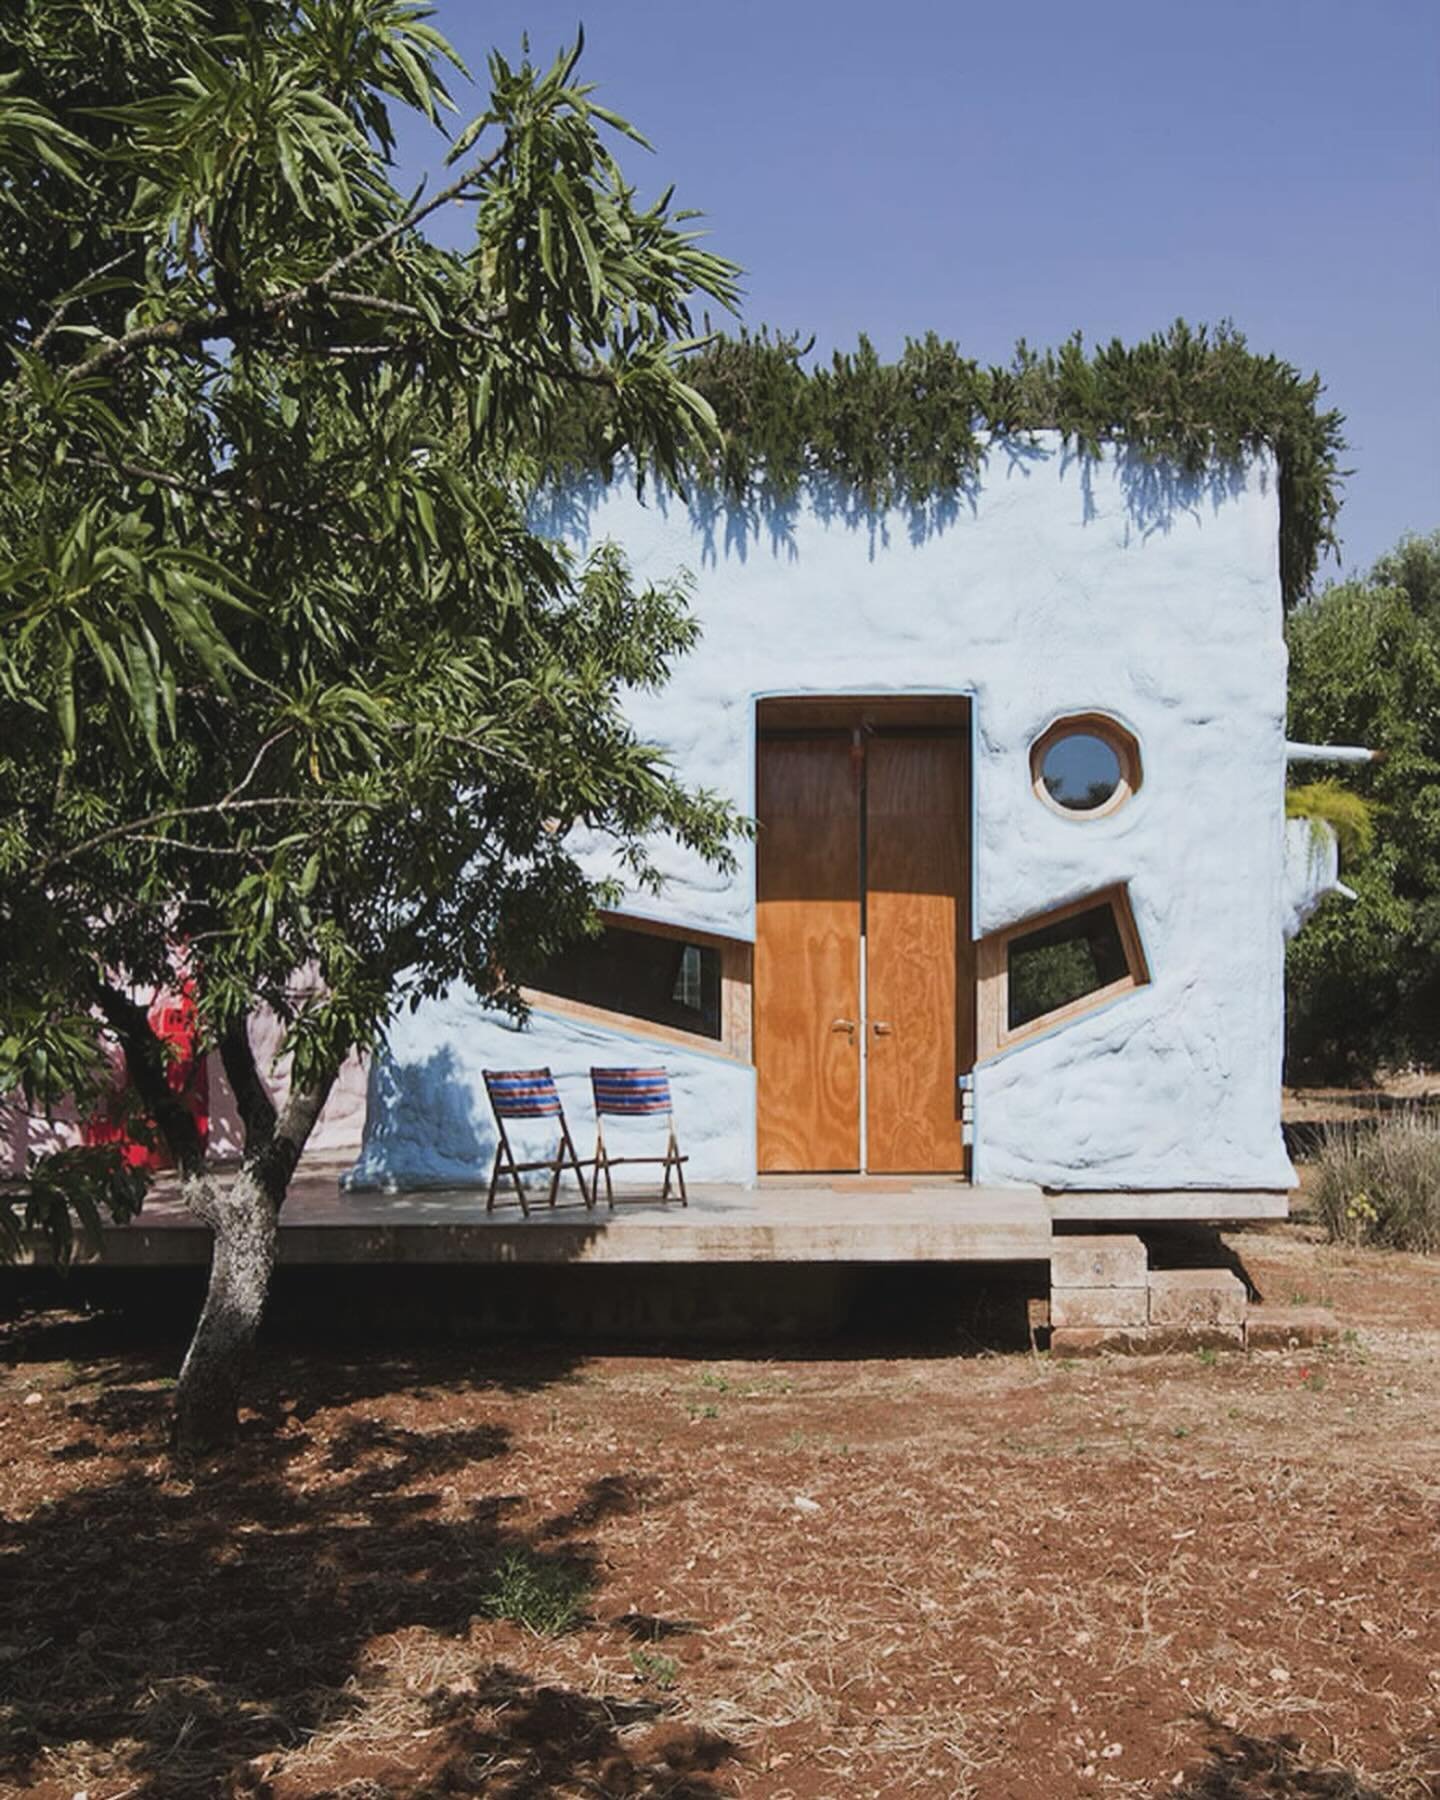 This has been the plan for many summers. Puglia and warm bread and olive trees. Just a bed and a book. 

#gaetanopesce #polyurethane #warmbread #olivetree #smallhouse #hisandhers